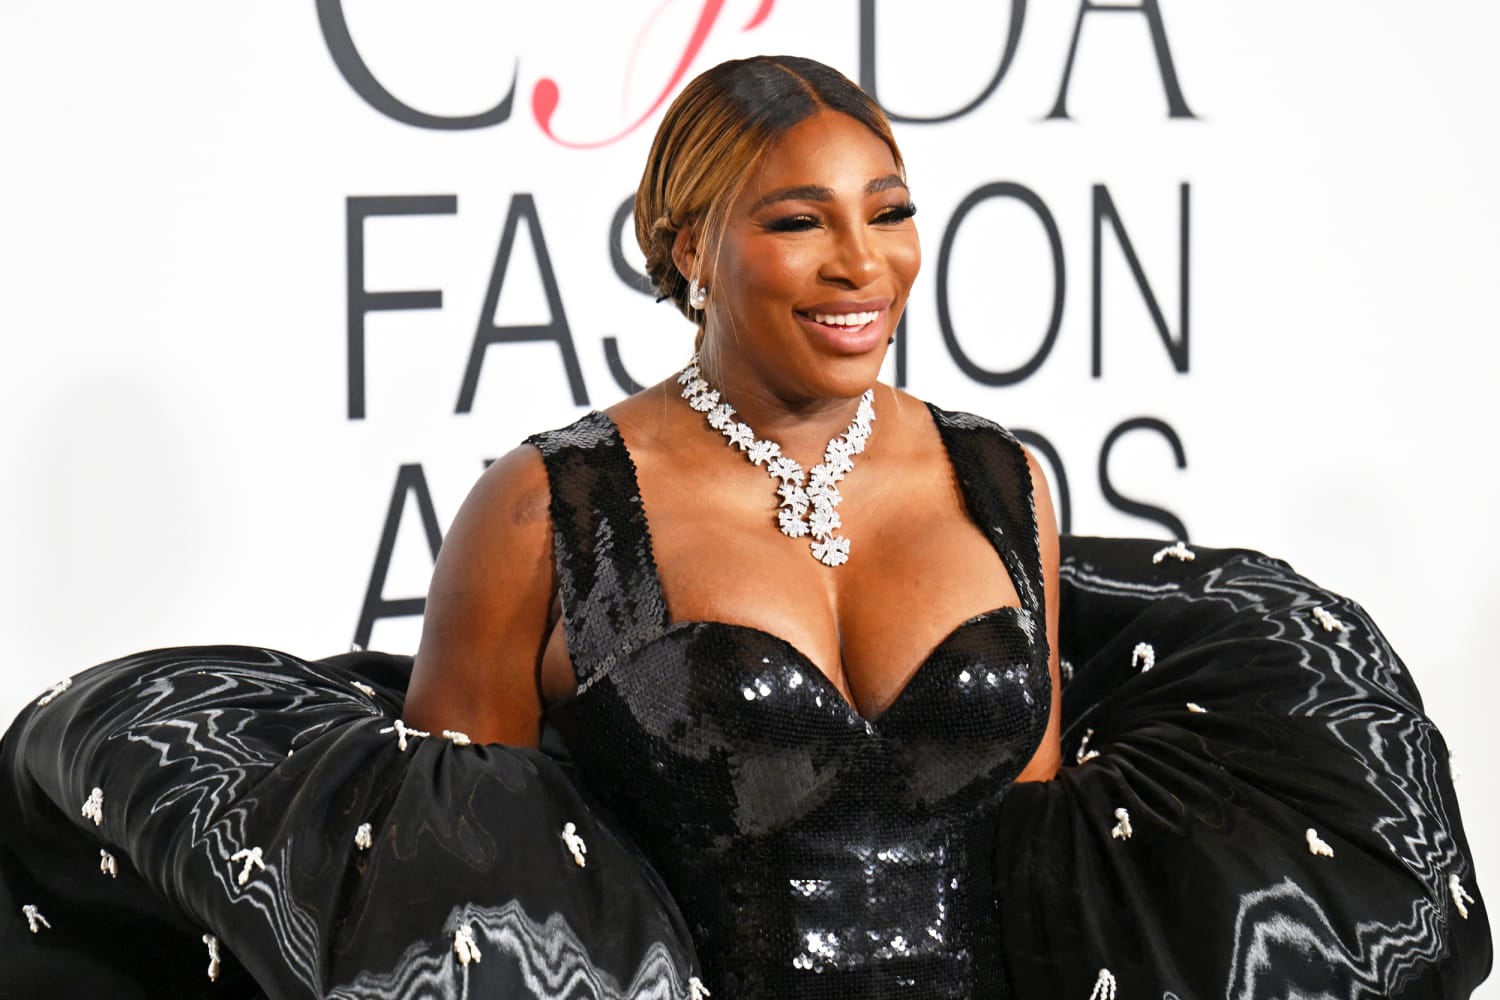 Serena Williams shares vulnerable postpartum try-on video: 'It doesn't fit' 